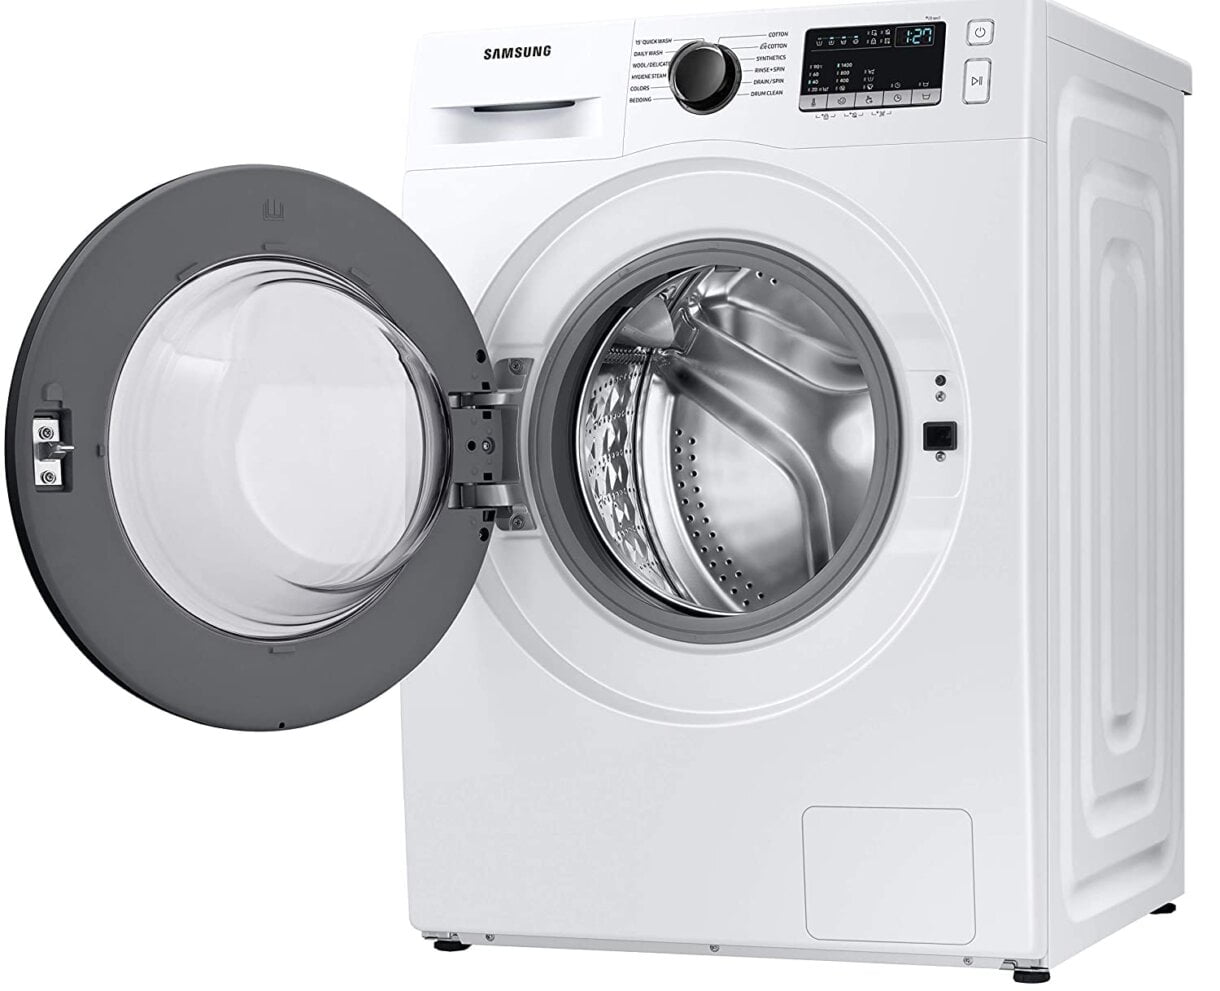 Samsung 8 Kg 5 Star Inverter, Hygiene Steam Fully-Automatic Front Loading Washing Machine (WW80T4040CE1TL, White)